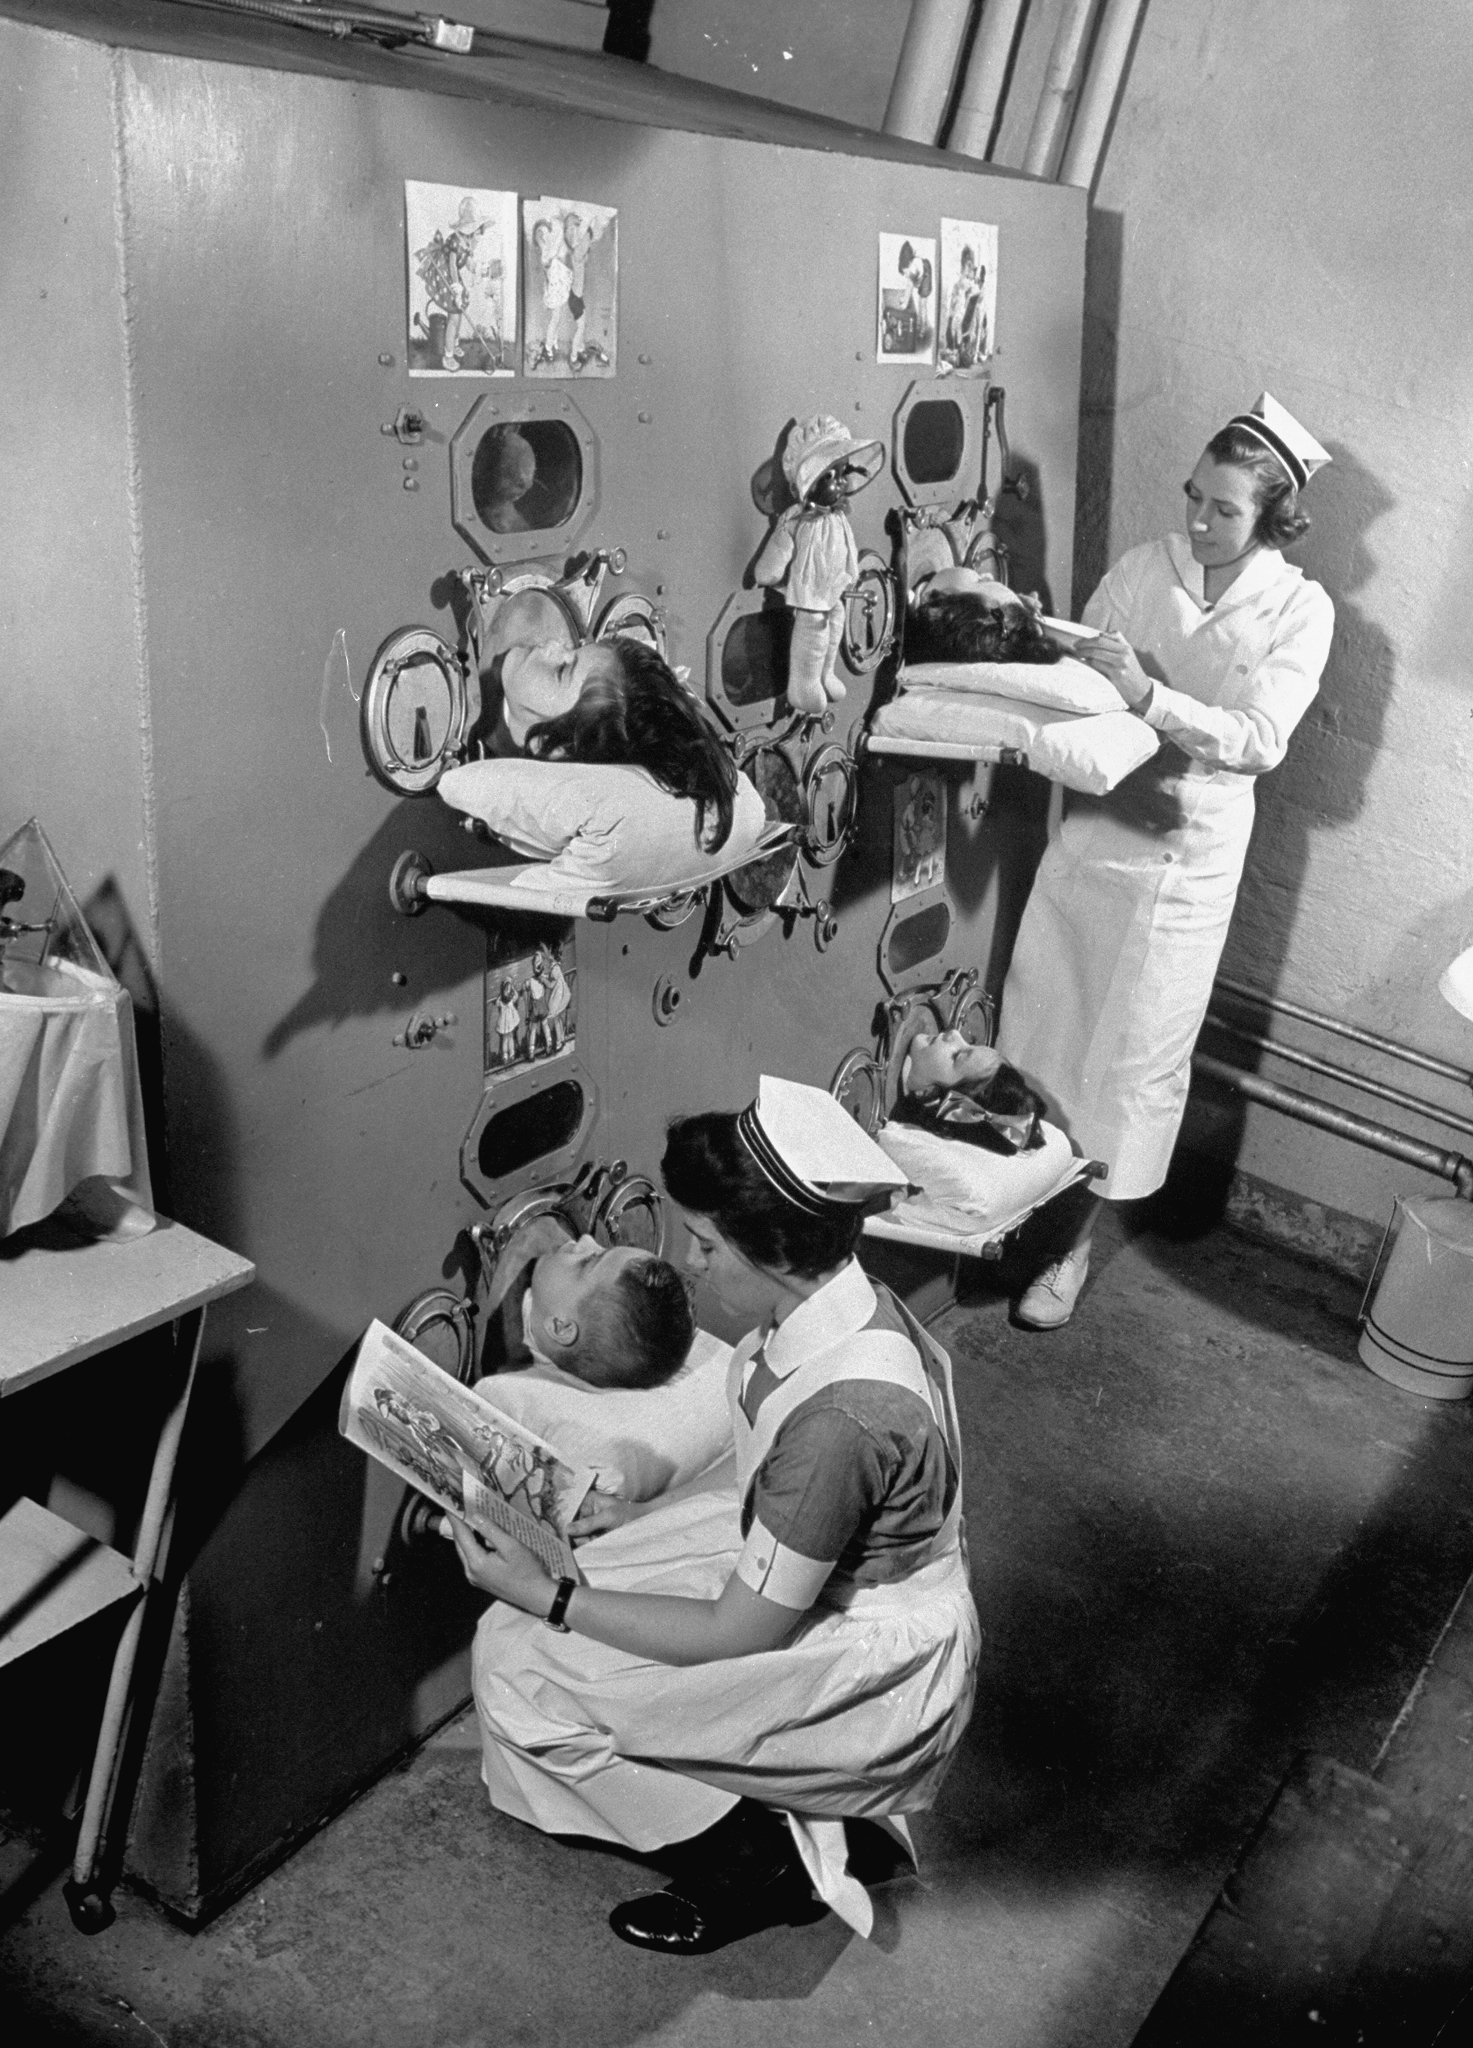 Nurses tend to four young polio patients lying on beds inside an "iron lung" in 1938.